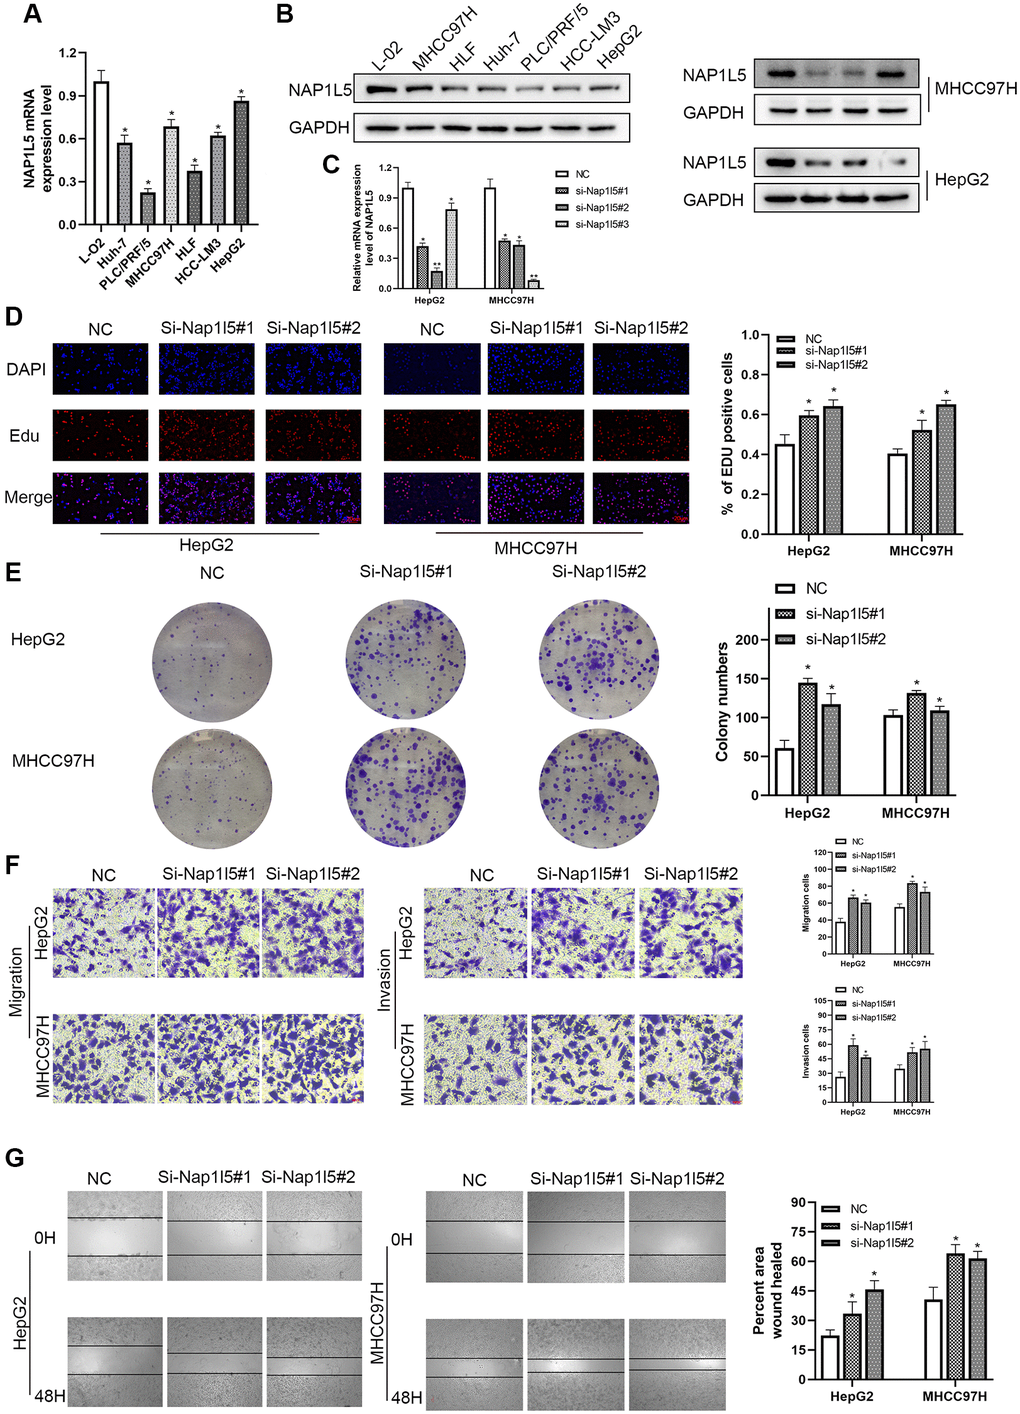 Downregulation of NAP1L5 can promote the proliferation, migration and invasion of hepatocellular carcinoma cells in vitro. (A) NAP1L5 mRNA expression in the LO2 and hepatoma cell lines. (B) The expression of NAP1L5 protein in the LO2 and hepatoma cell lines. (C) Validation of siRNaA transfection efficiency. (D) The effect of the downregulation of NAP1L5 on the proliferation of HepG2 and MHCC97H cells was detected by EdU staining. (E) A colony formation assay was used to detect the effect of NAP1L5 downregulation on the proliferation of HepG2 and MHCC97H cells. (F) Transwell assays were used to detect the effect of NAP1L5 downregulation on the migration and invasion of HepG2 and MHCC97H cells. (G) The effect of the downregulation of NAP1L5 on the migration of HepG2 and MHCC97H cells was detected by a wound healing migration assay. *p **p ***p 